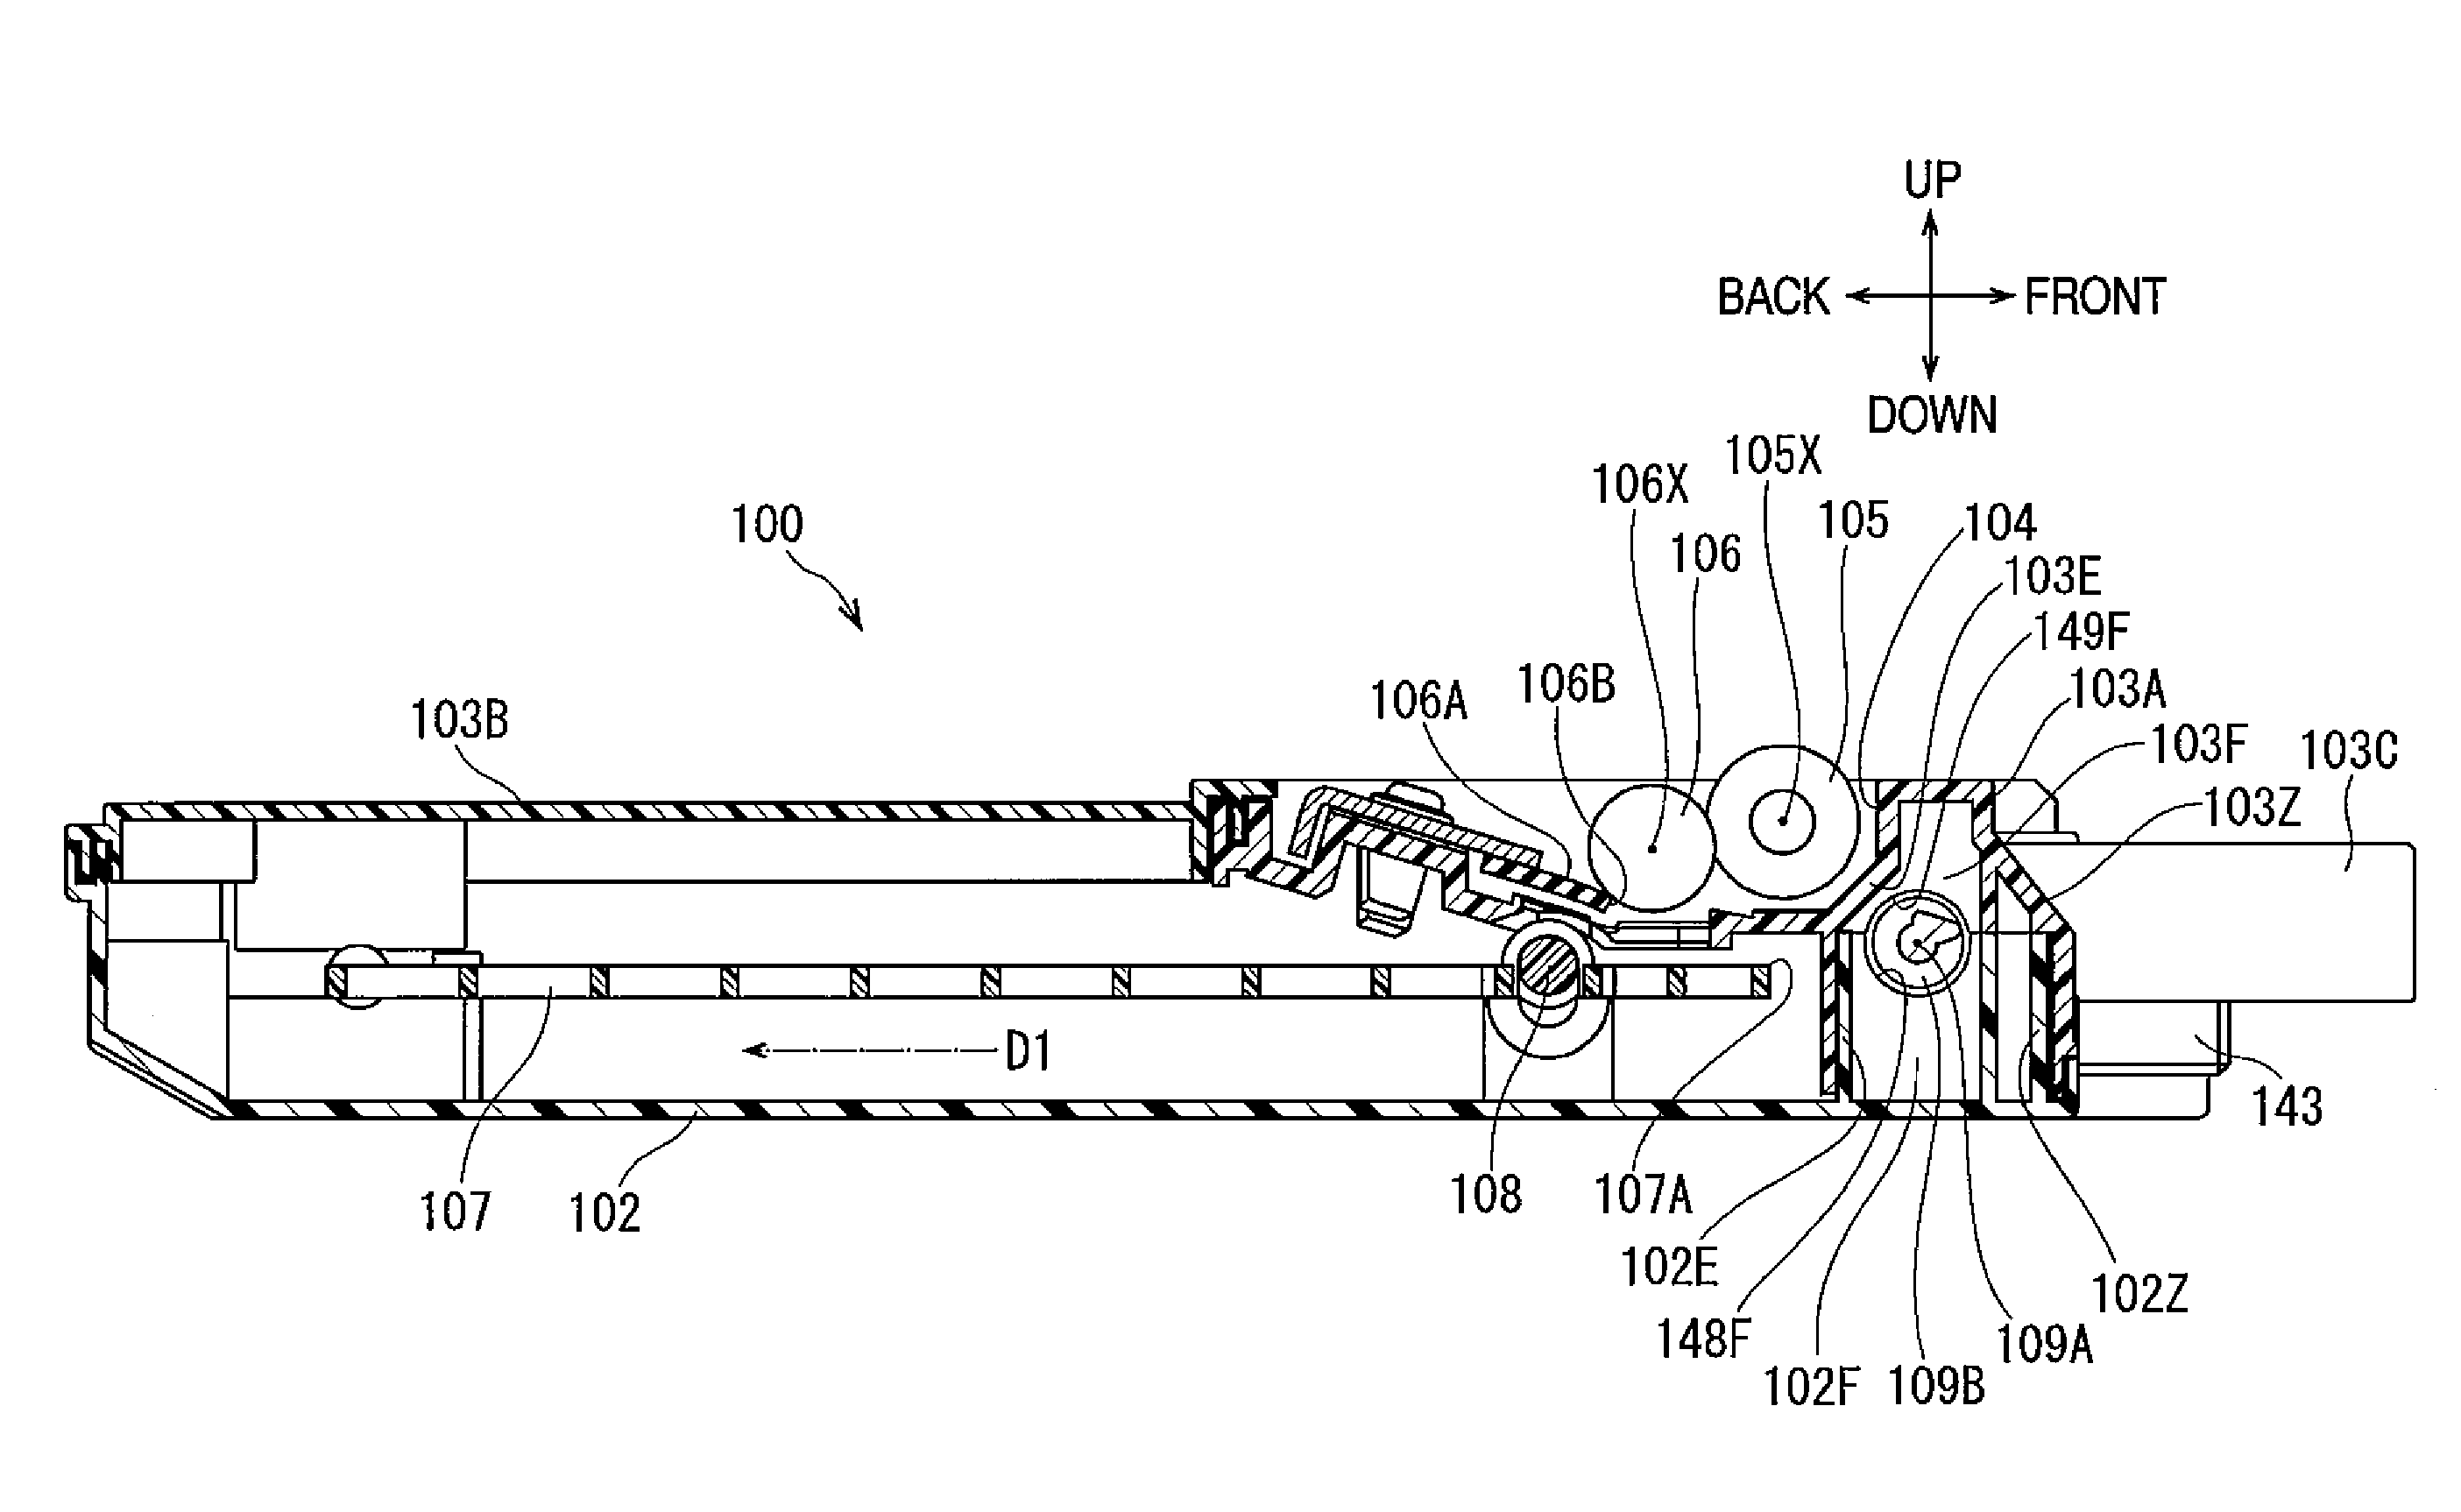 Toner recovery machine and image forming apparatus